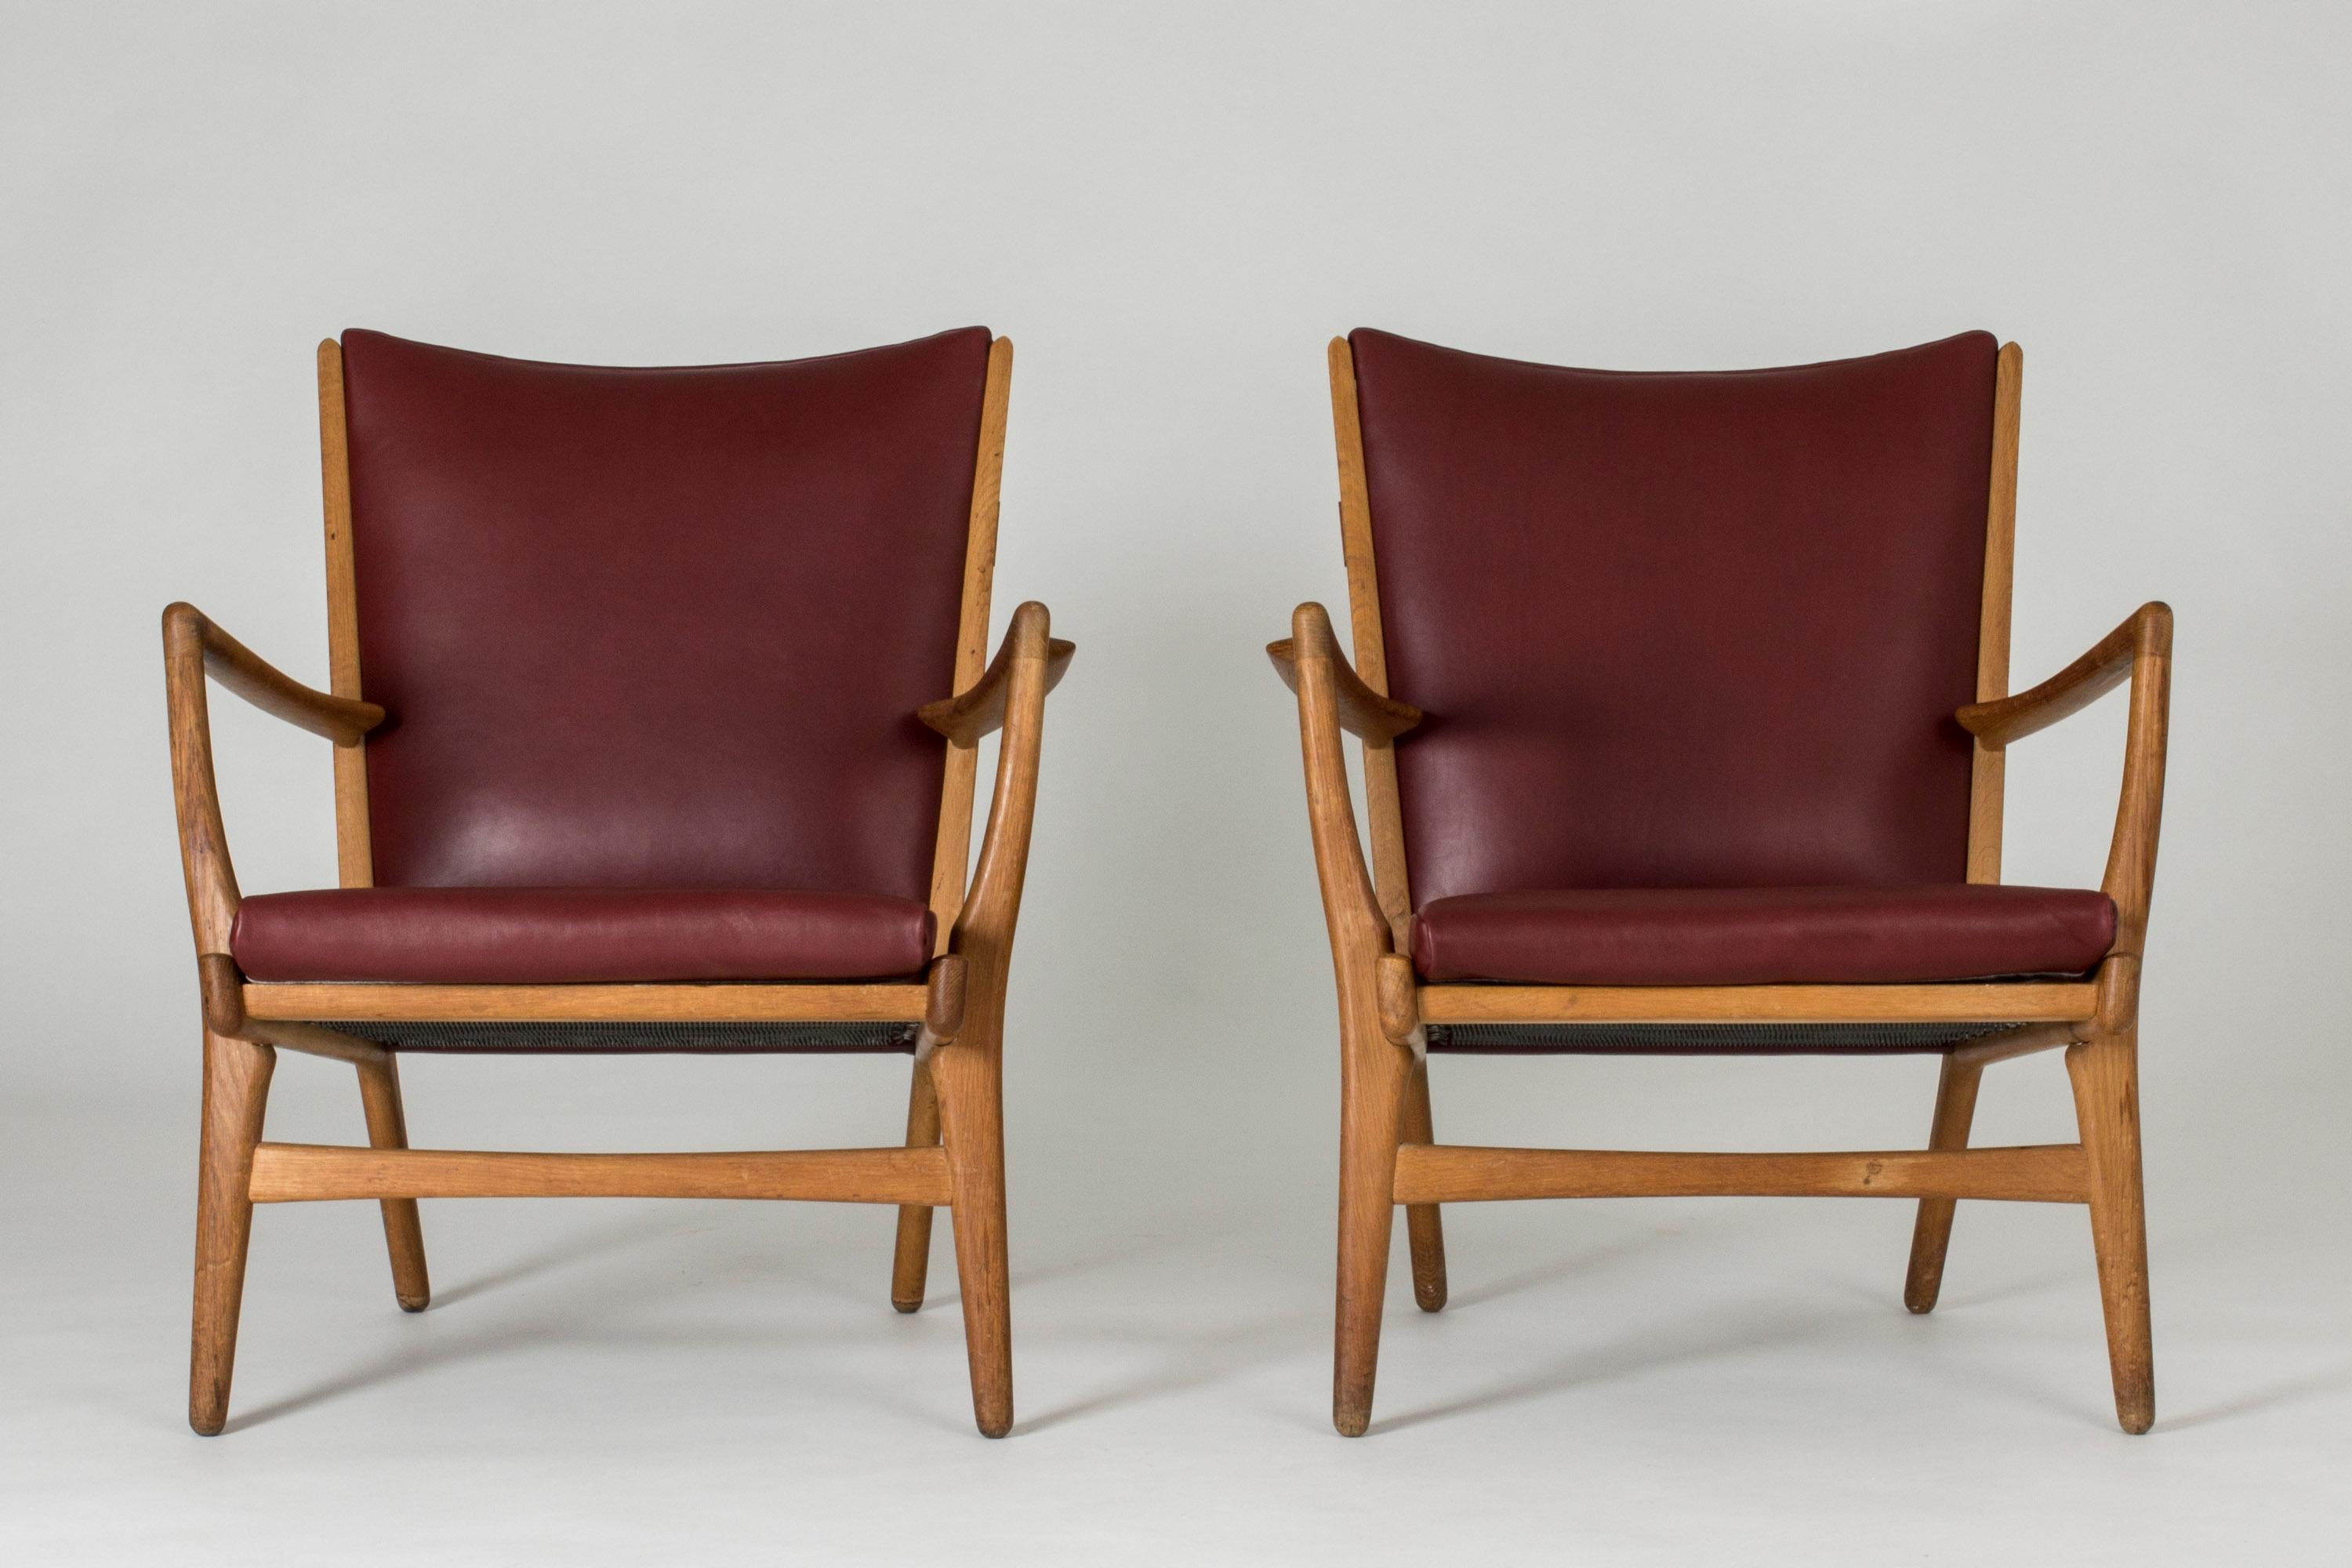 Pair of awesome “AP 16” lounge chairs by Hans J. Wegner. Made from oak and upholstered with beautiful oxblood leather.